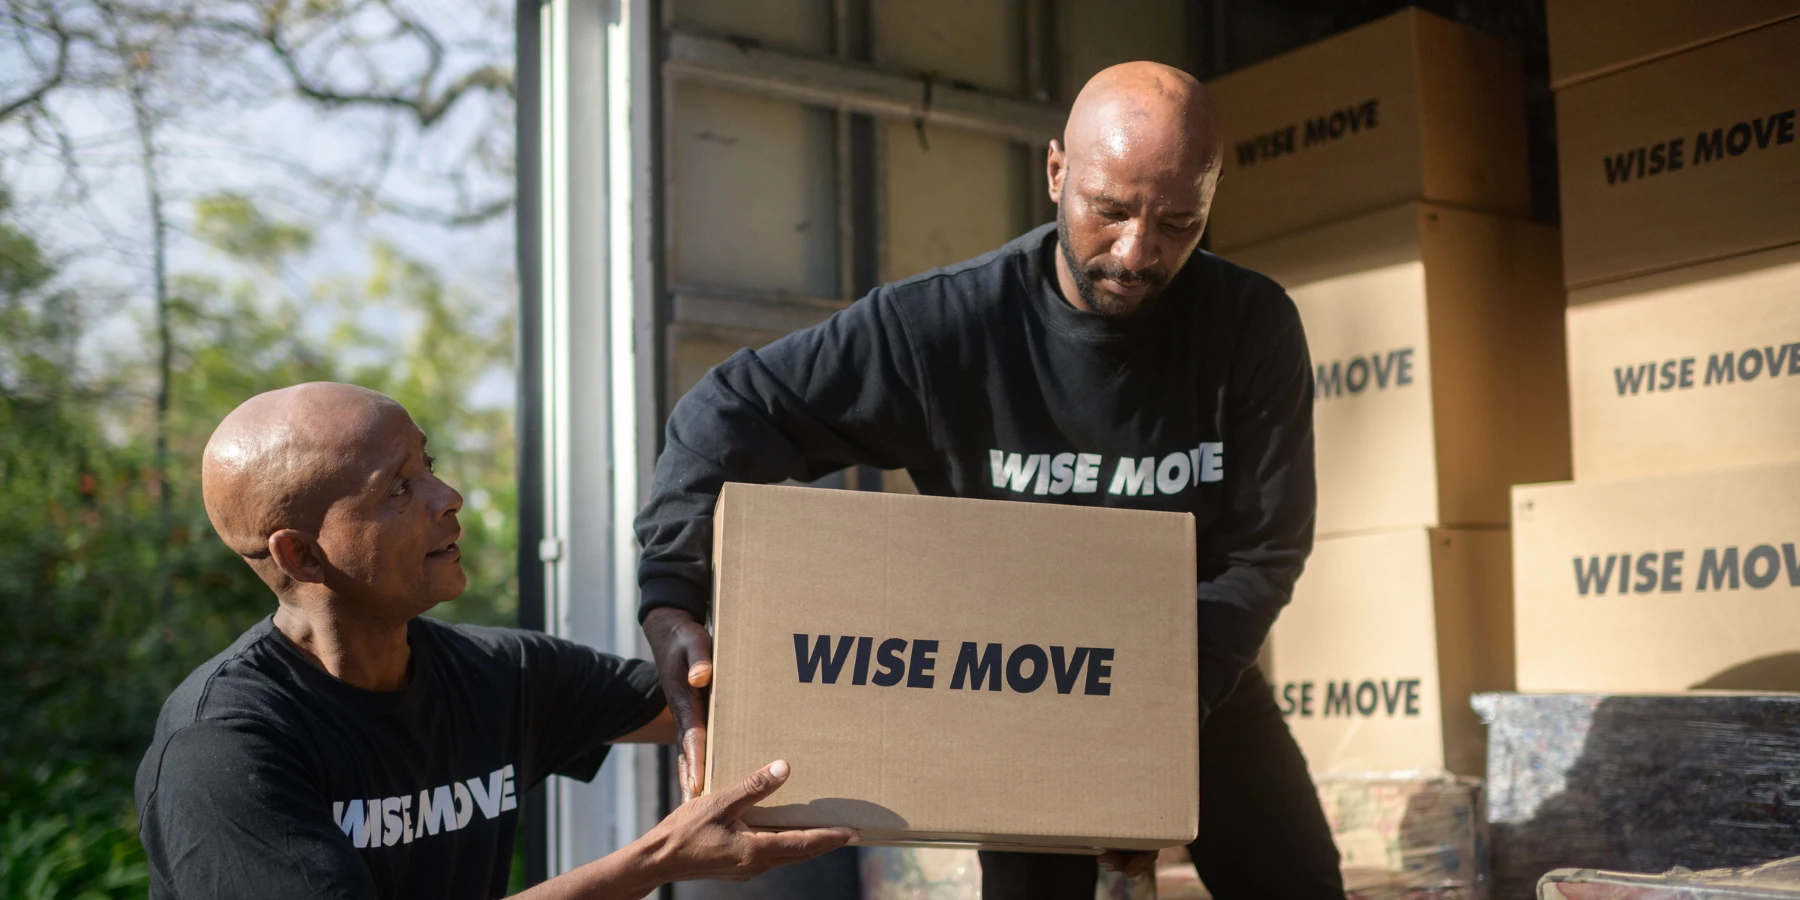 Find trusted office moving services on Wise Move